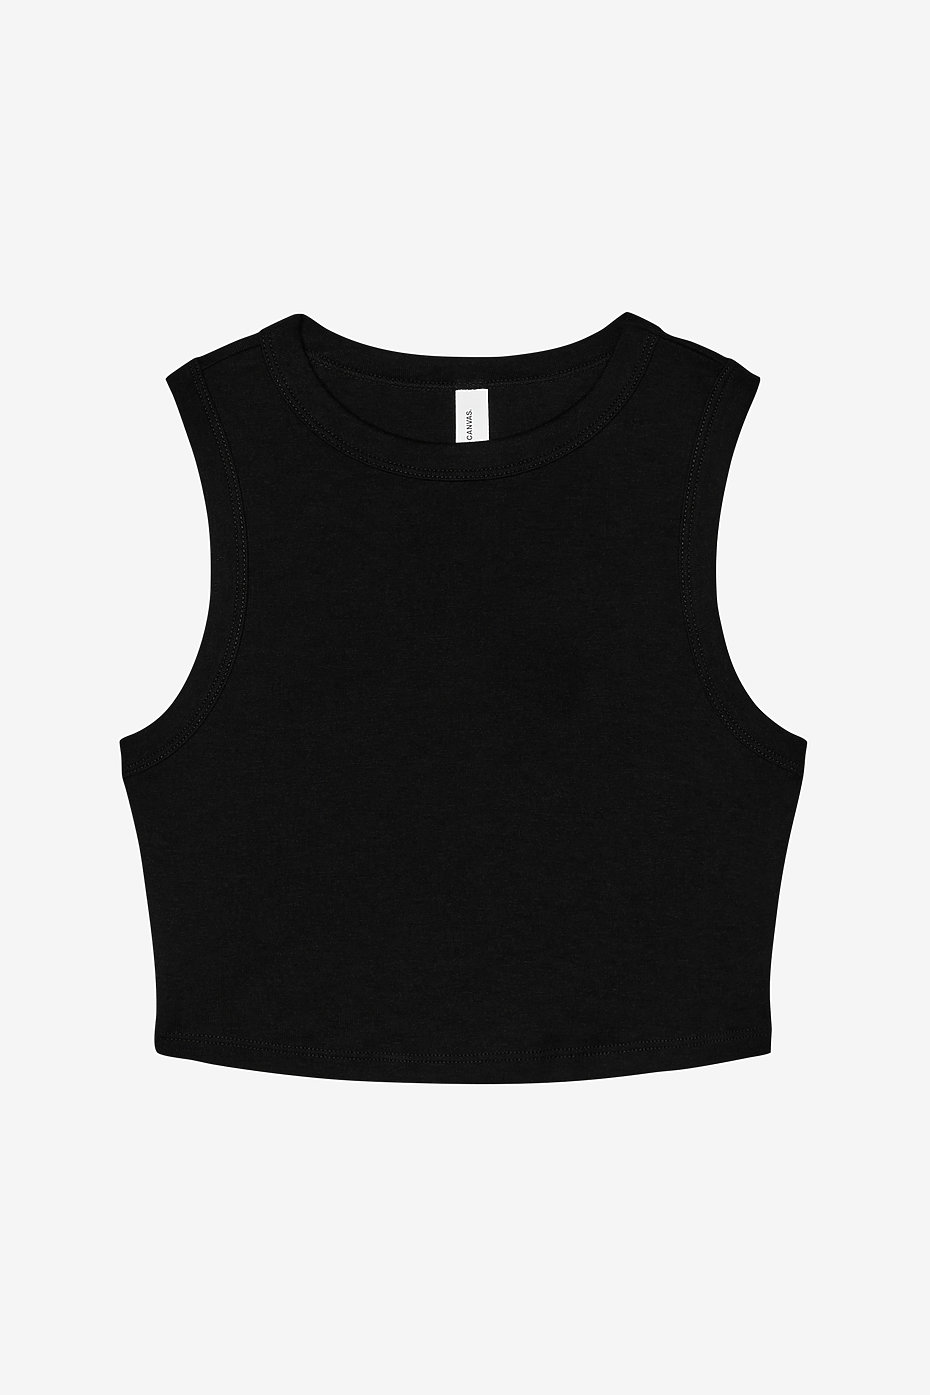 Black Plain Women's & Girls' Solid Ribbed Crop Tank Top at Rs 340